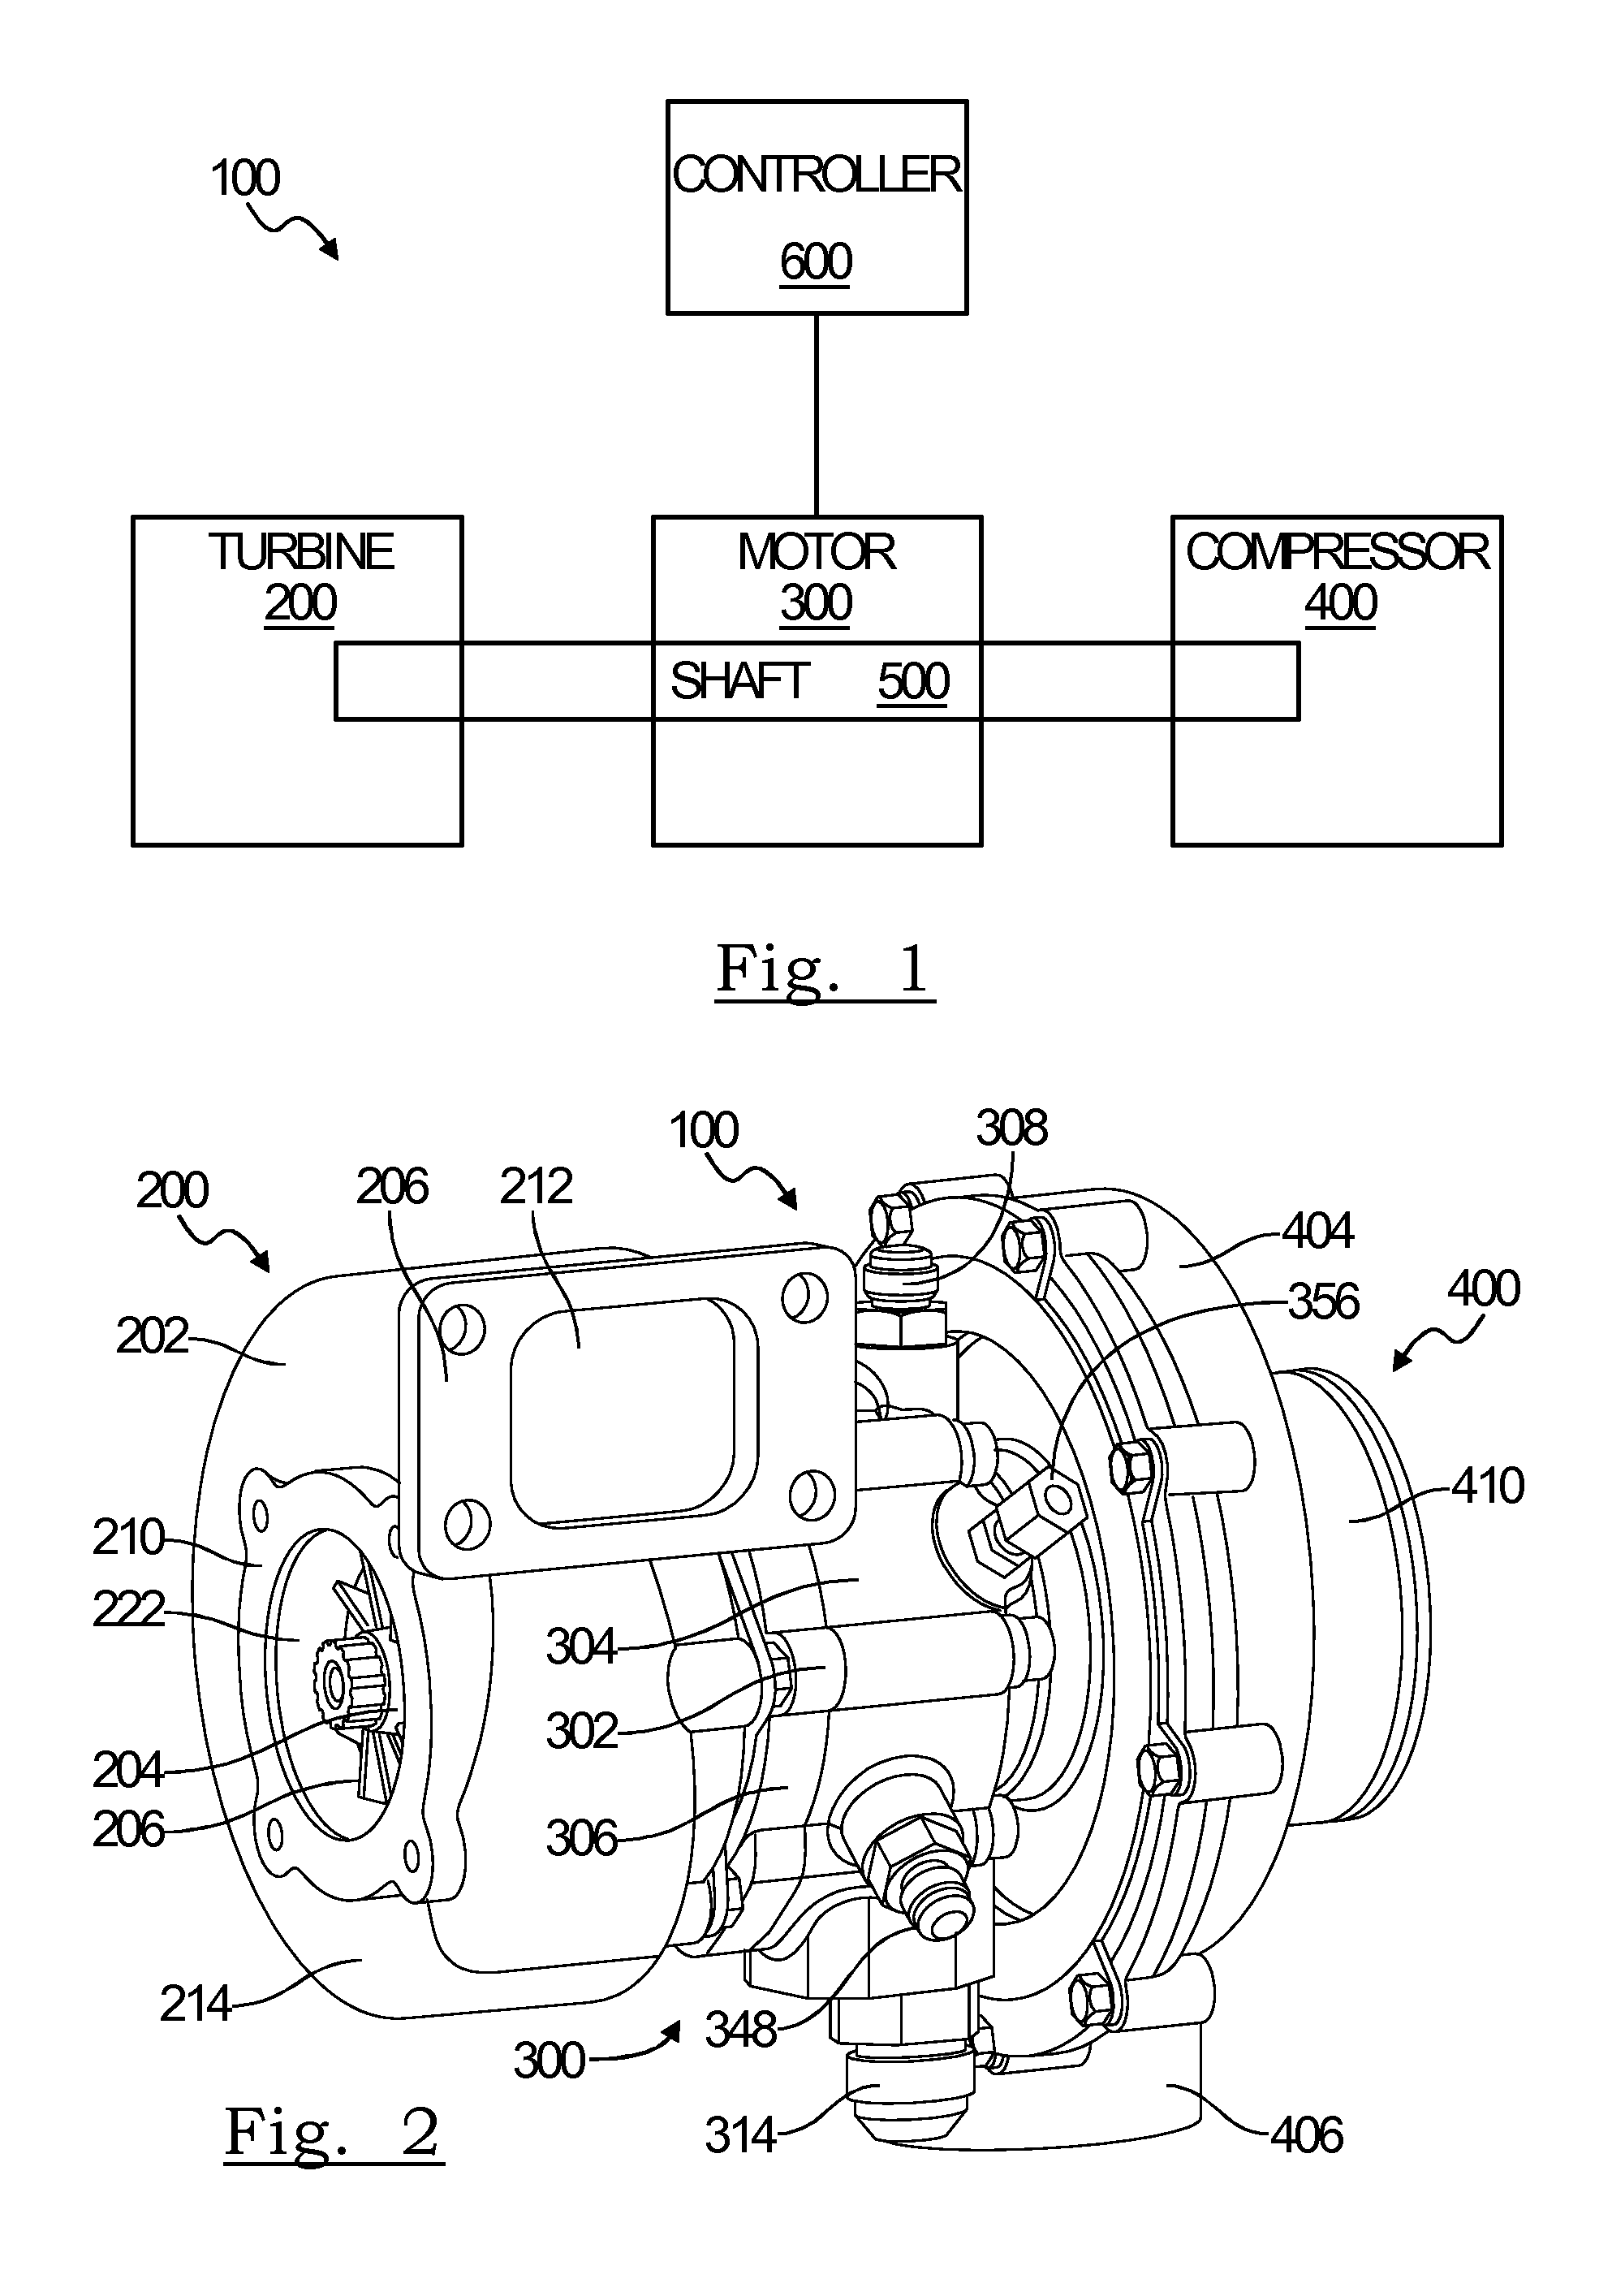 Cooling an electrically controlled turbocharger